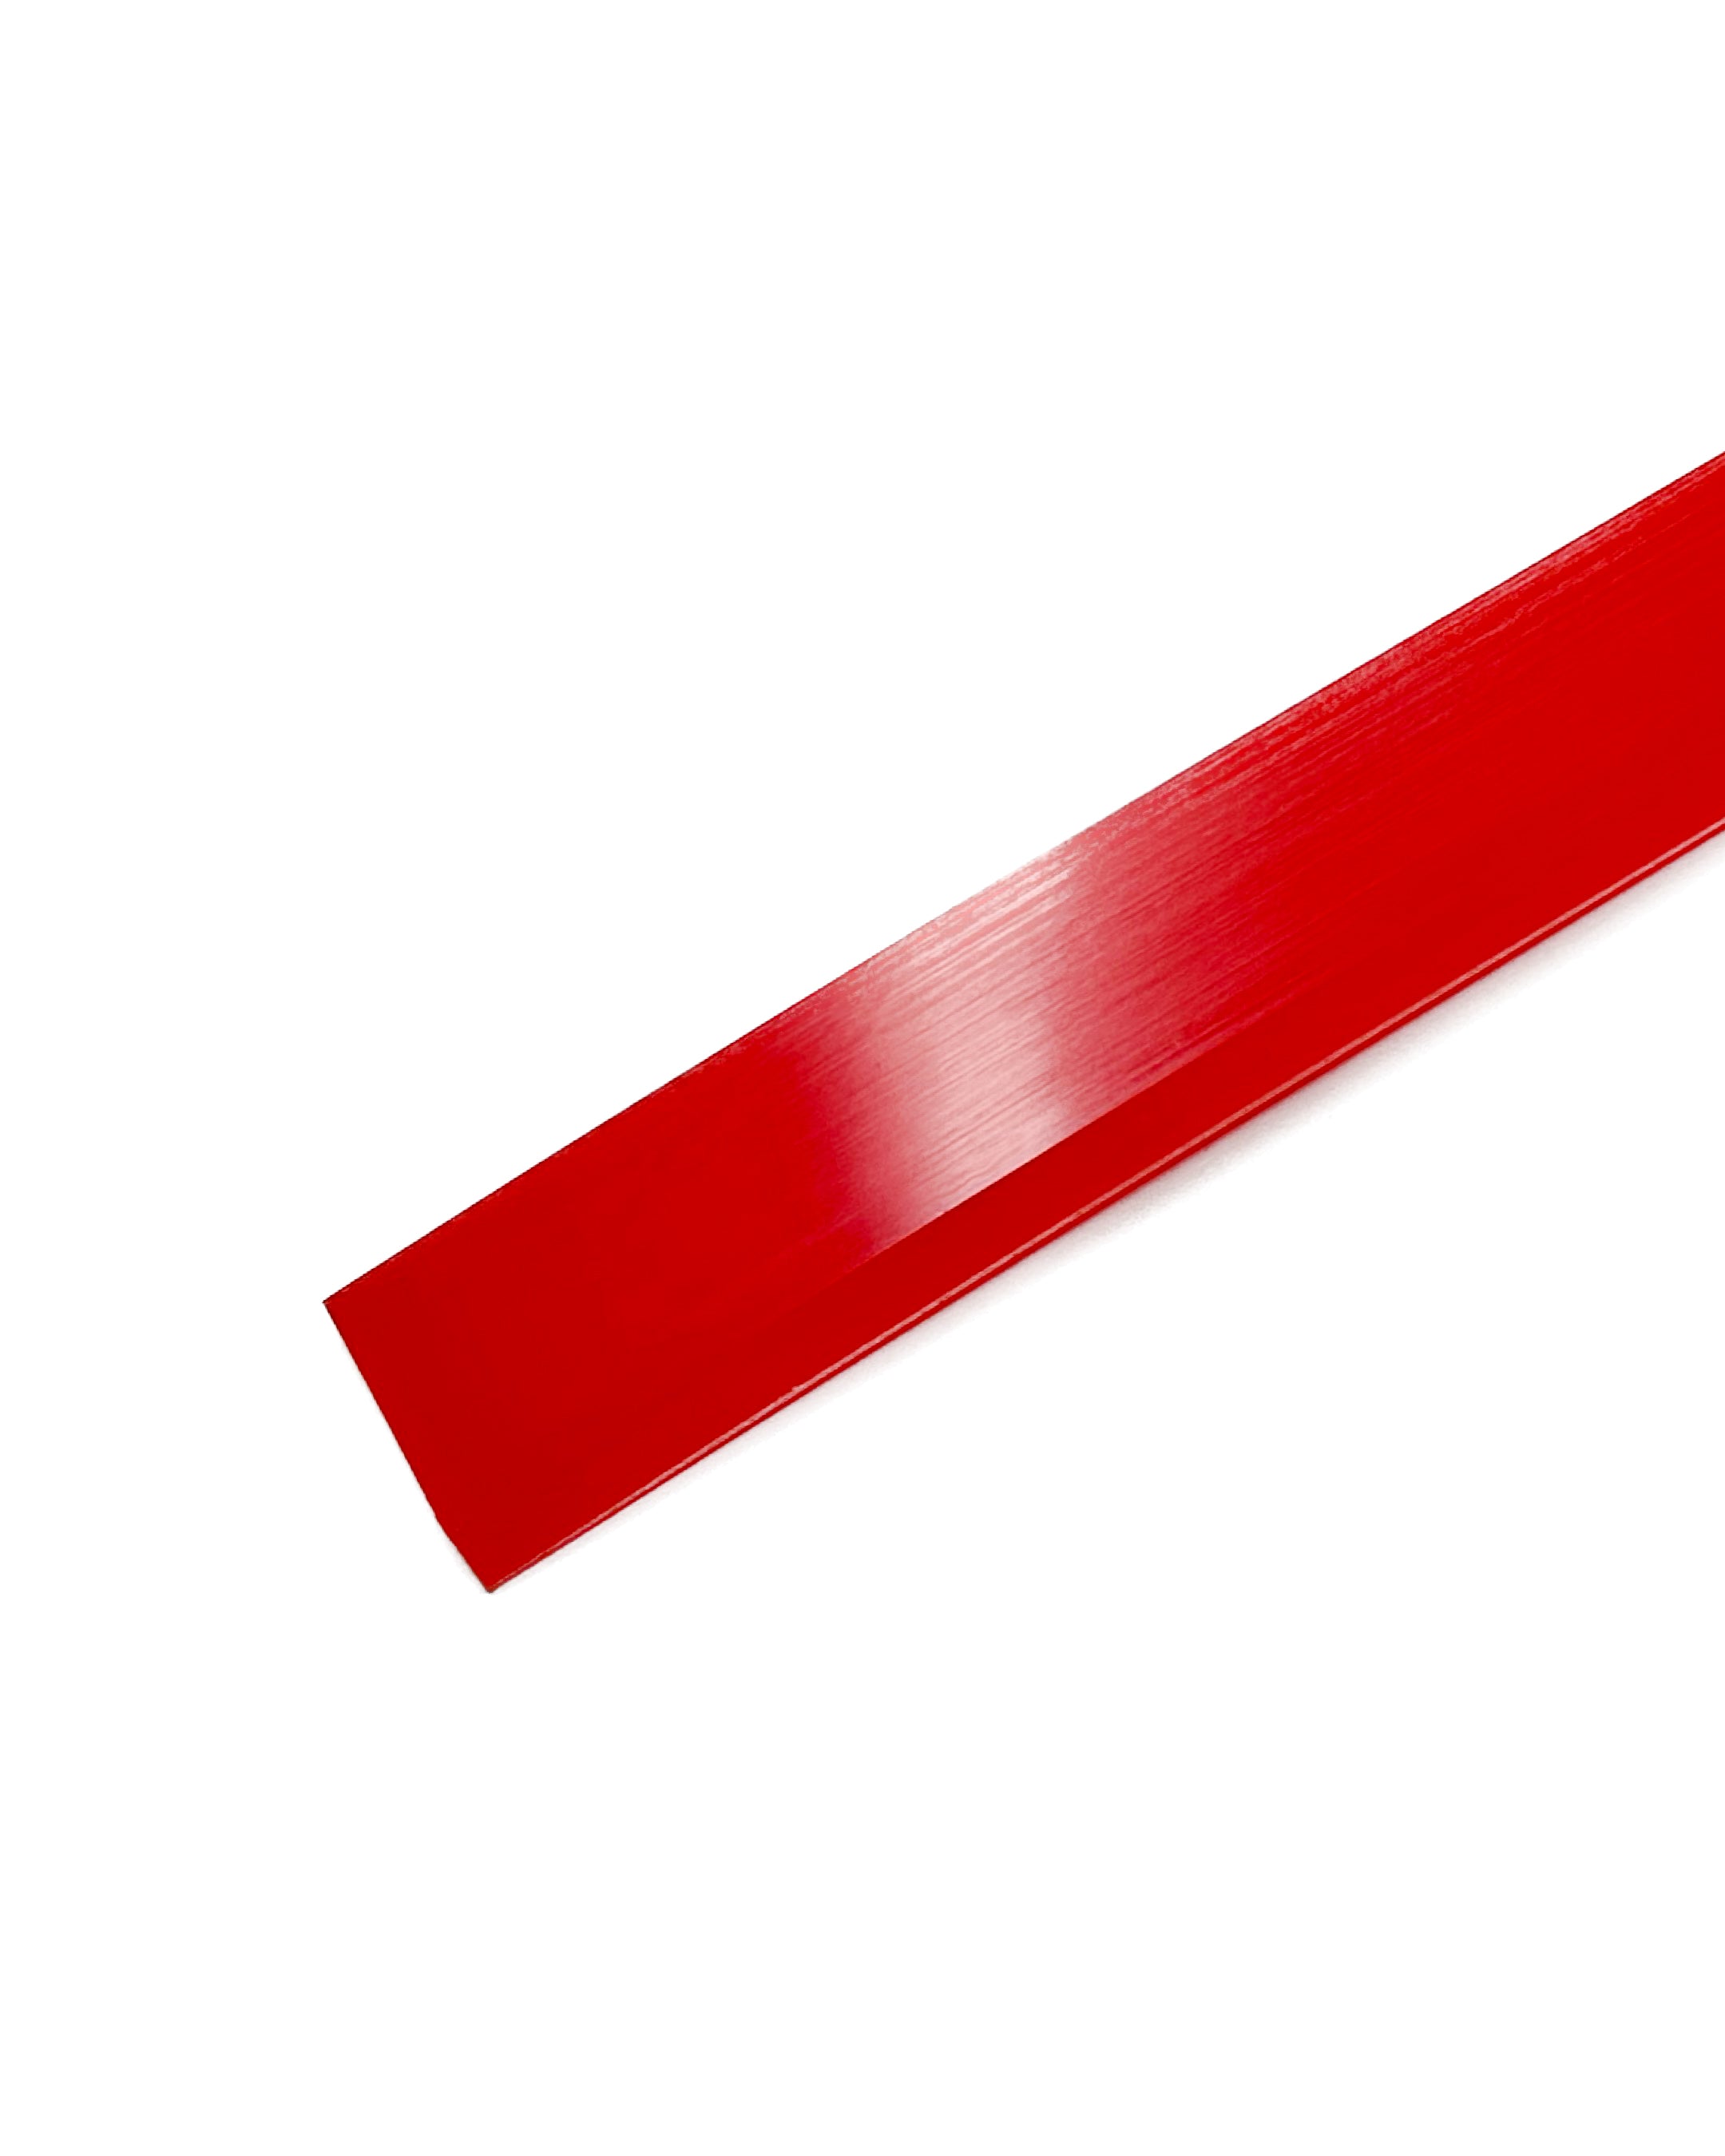 Red Swiper or “Superman” Squeegee Refill Blade